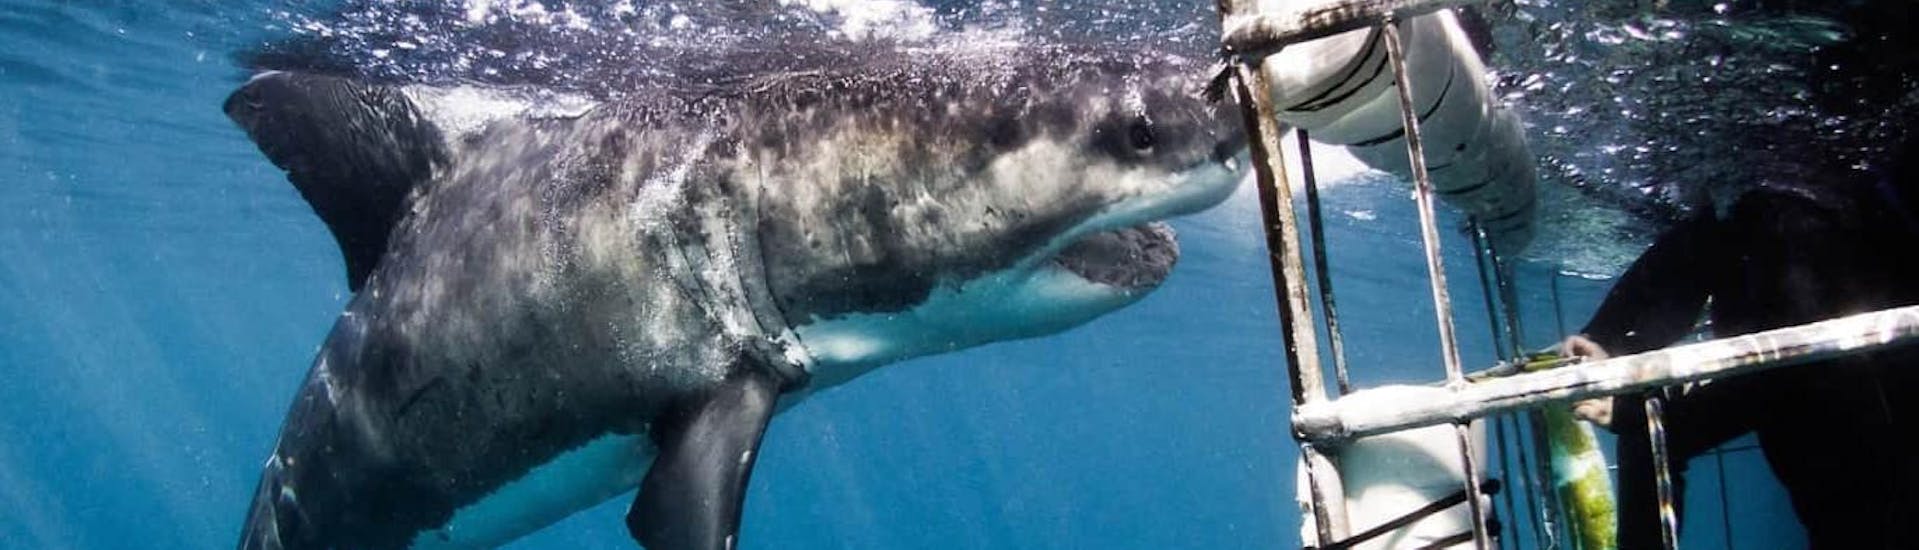 Bootstour mit Wildtierbeobachtung mit White Shark Diving Company - Gansbaai - Hero image